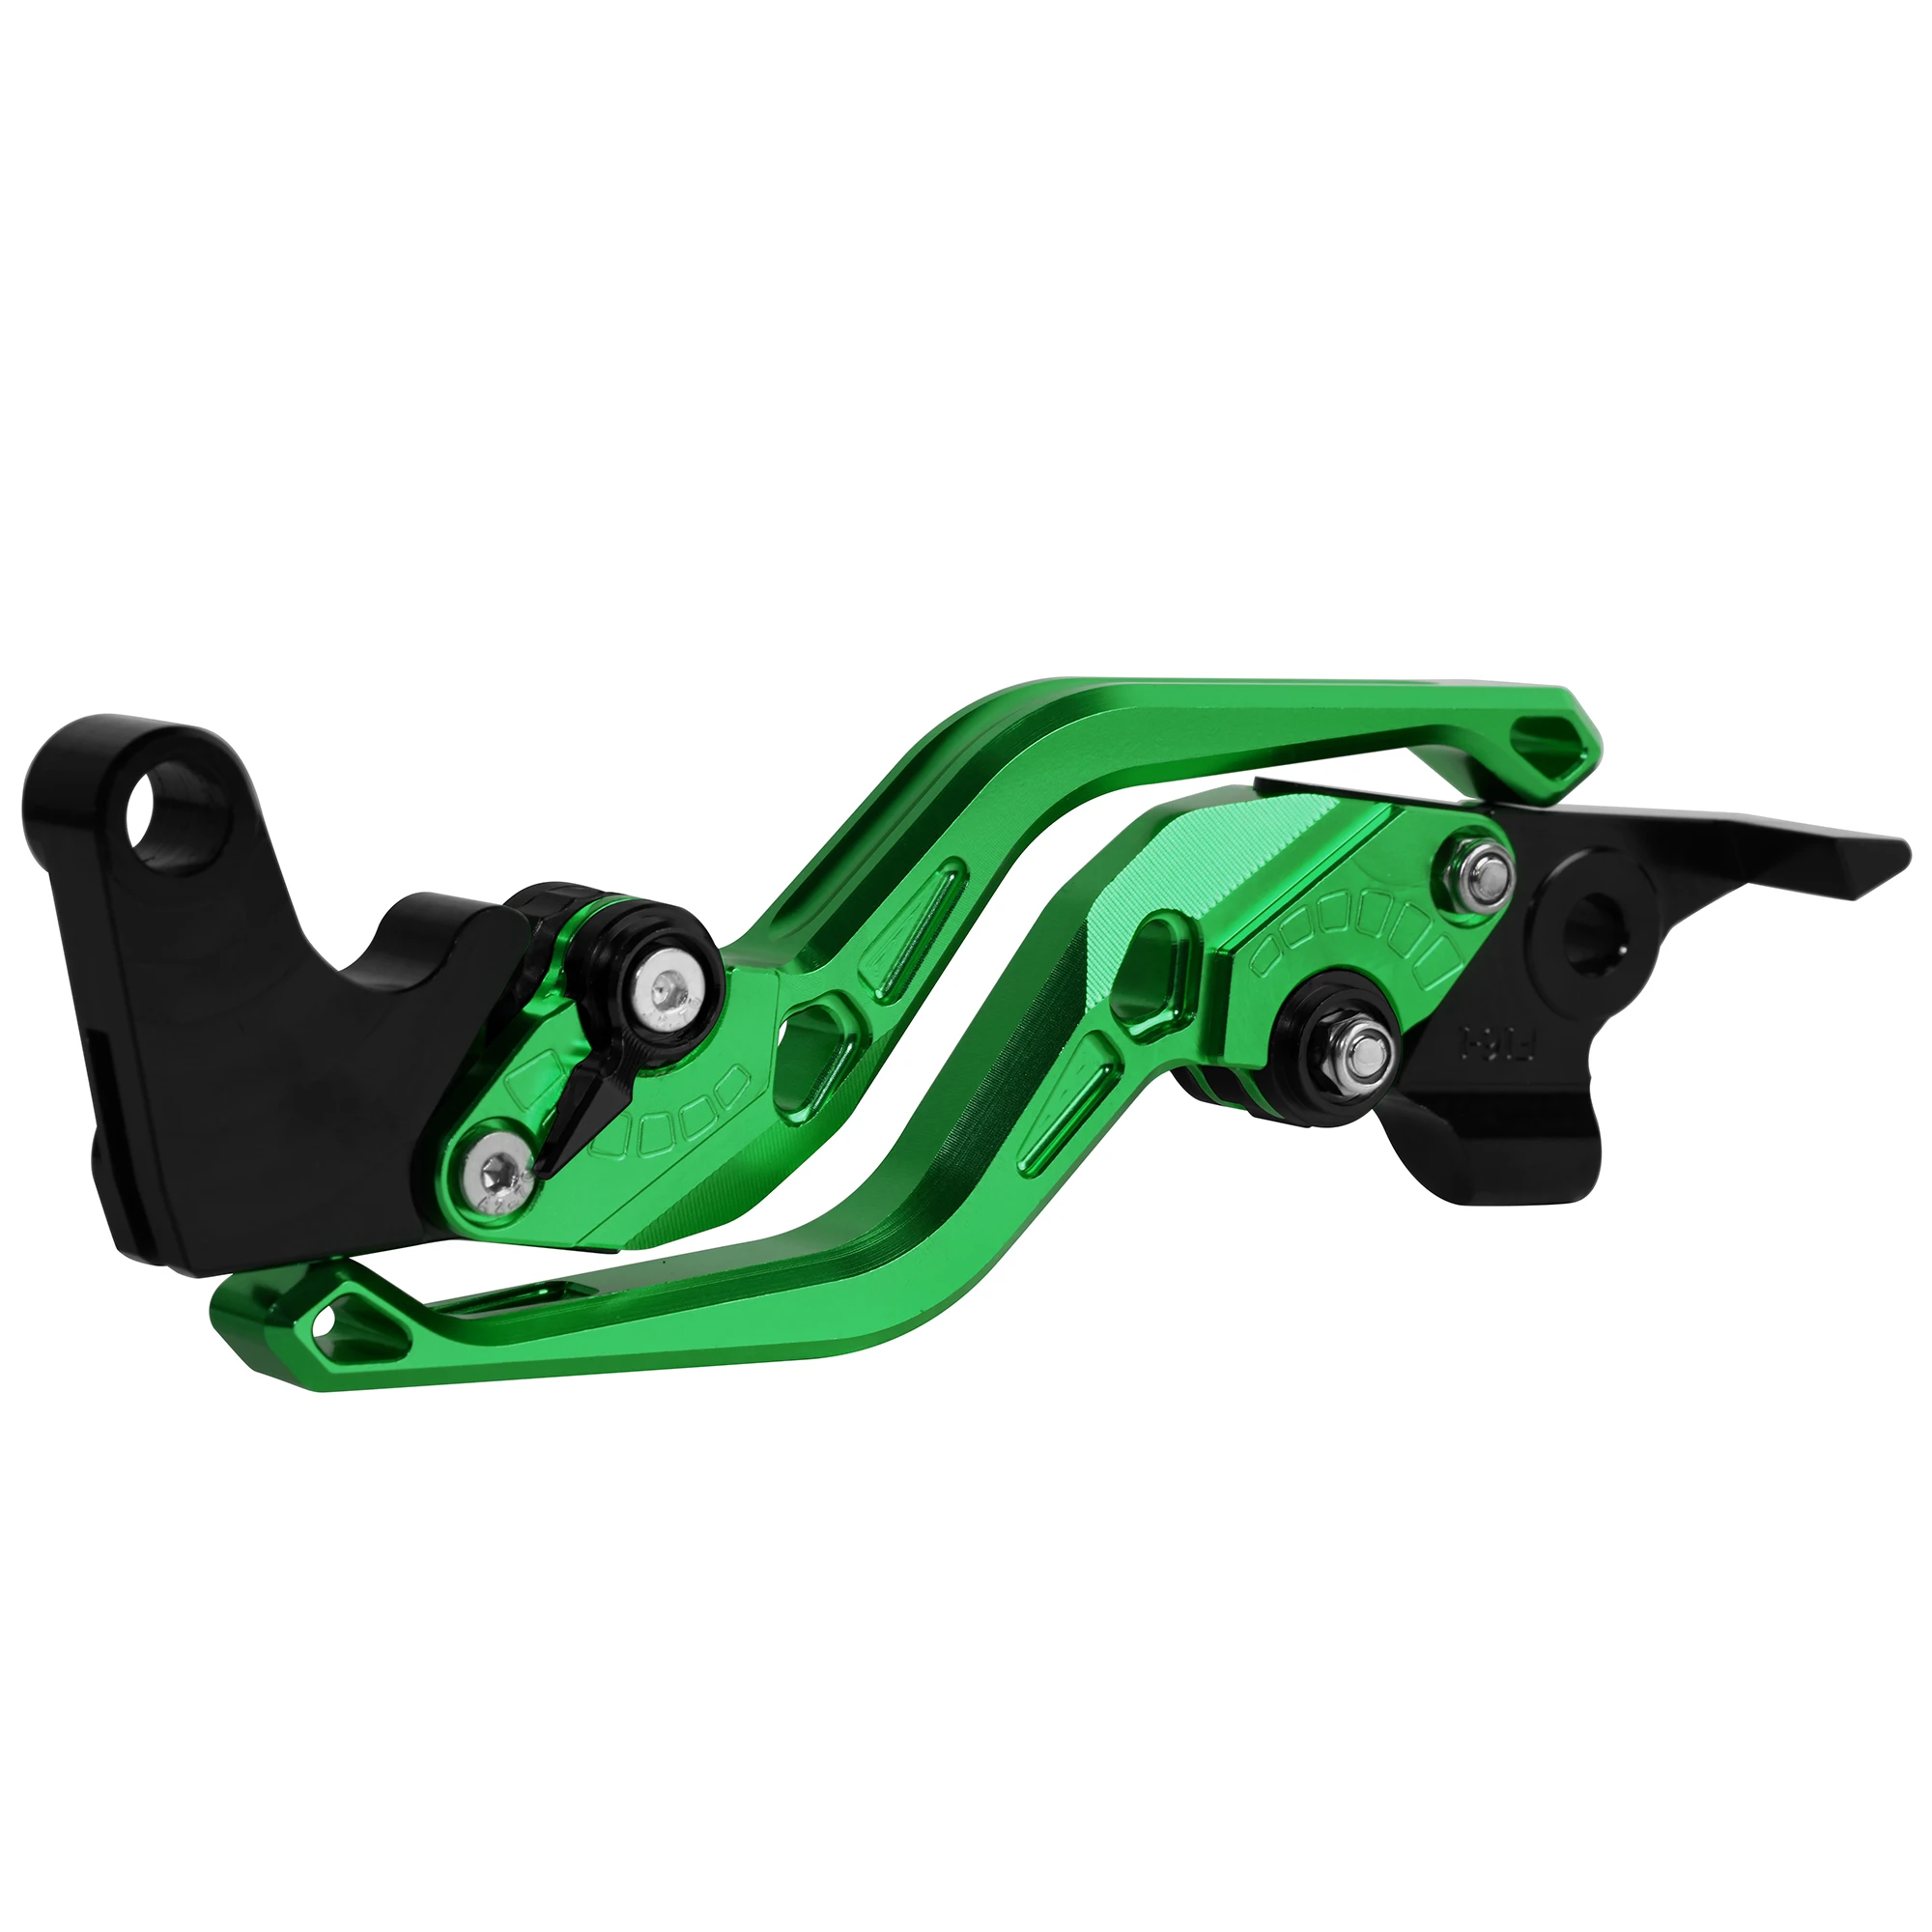 For Kawasaki ZZR400 1990-1999 And XANTHUS D1 / D3 1992 1994 Hot Sale Aluminum Adjustable Motorcycle Brake Clutch Lever CNC |